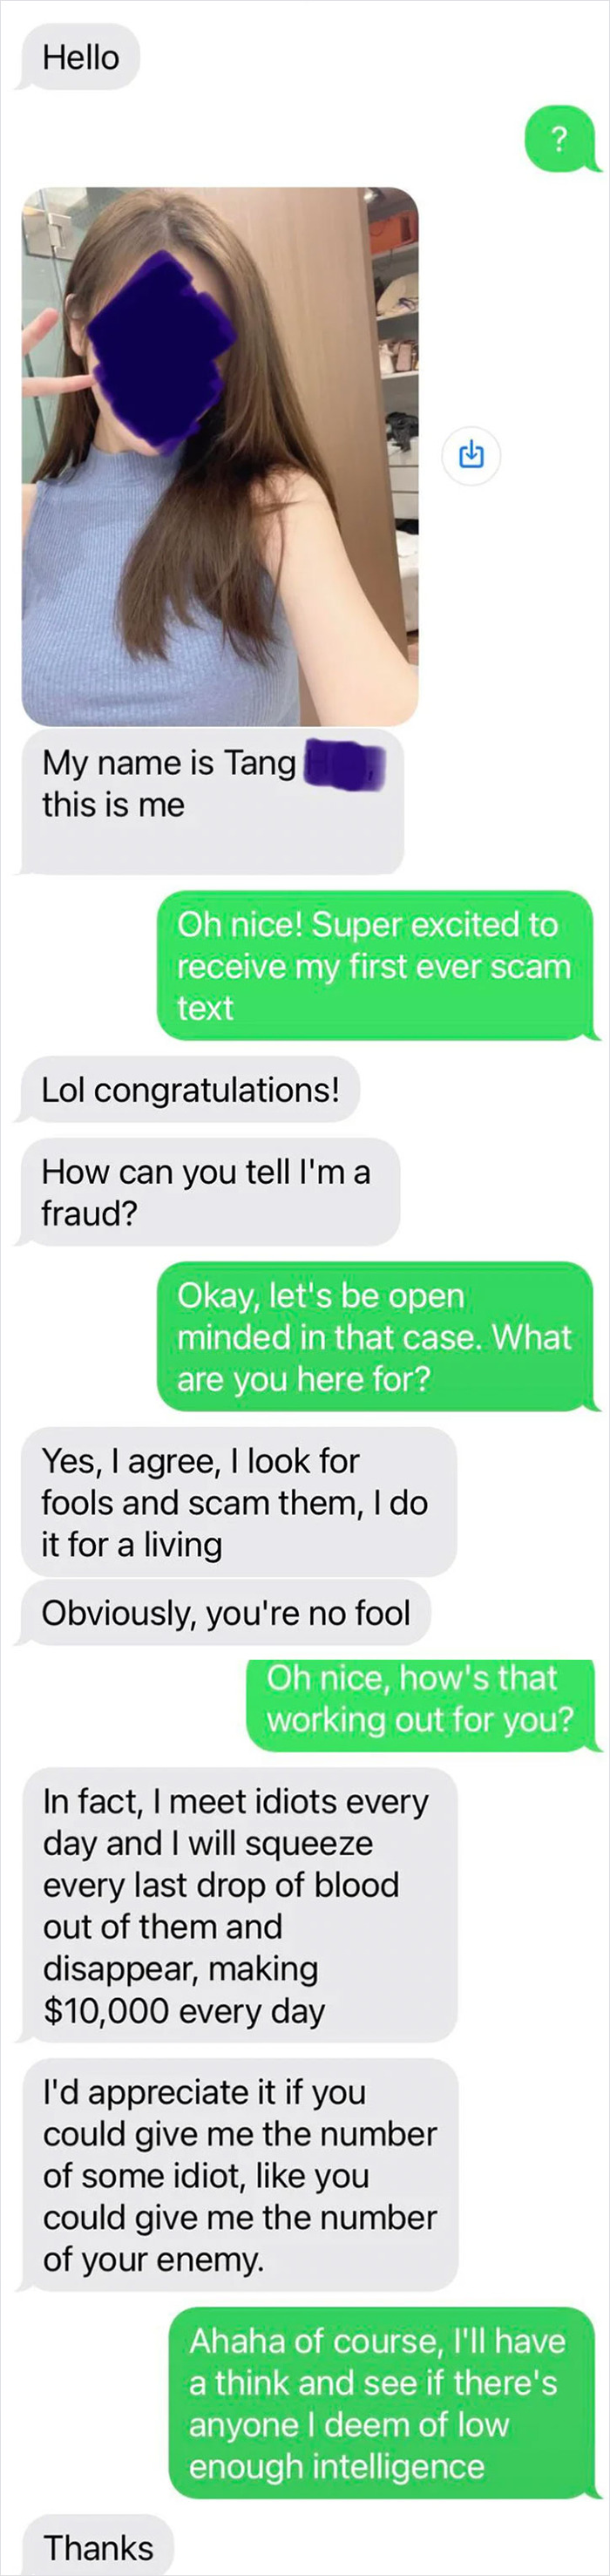 I Finally Got One!! Or At Least, I Think I Did. The Conversation Did Not Quite Go As Expected